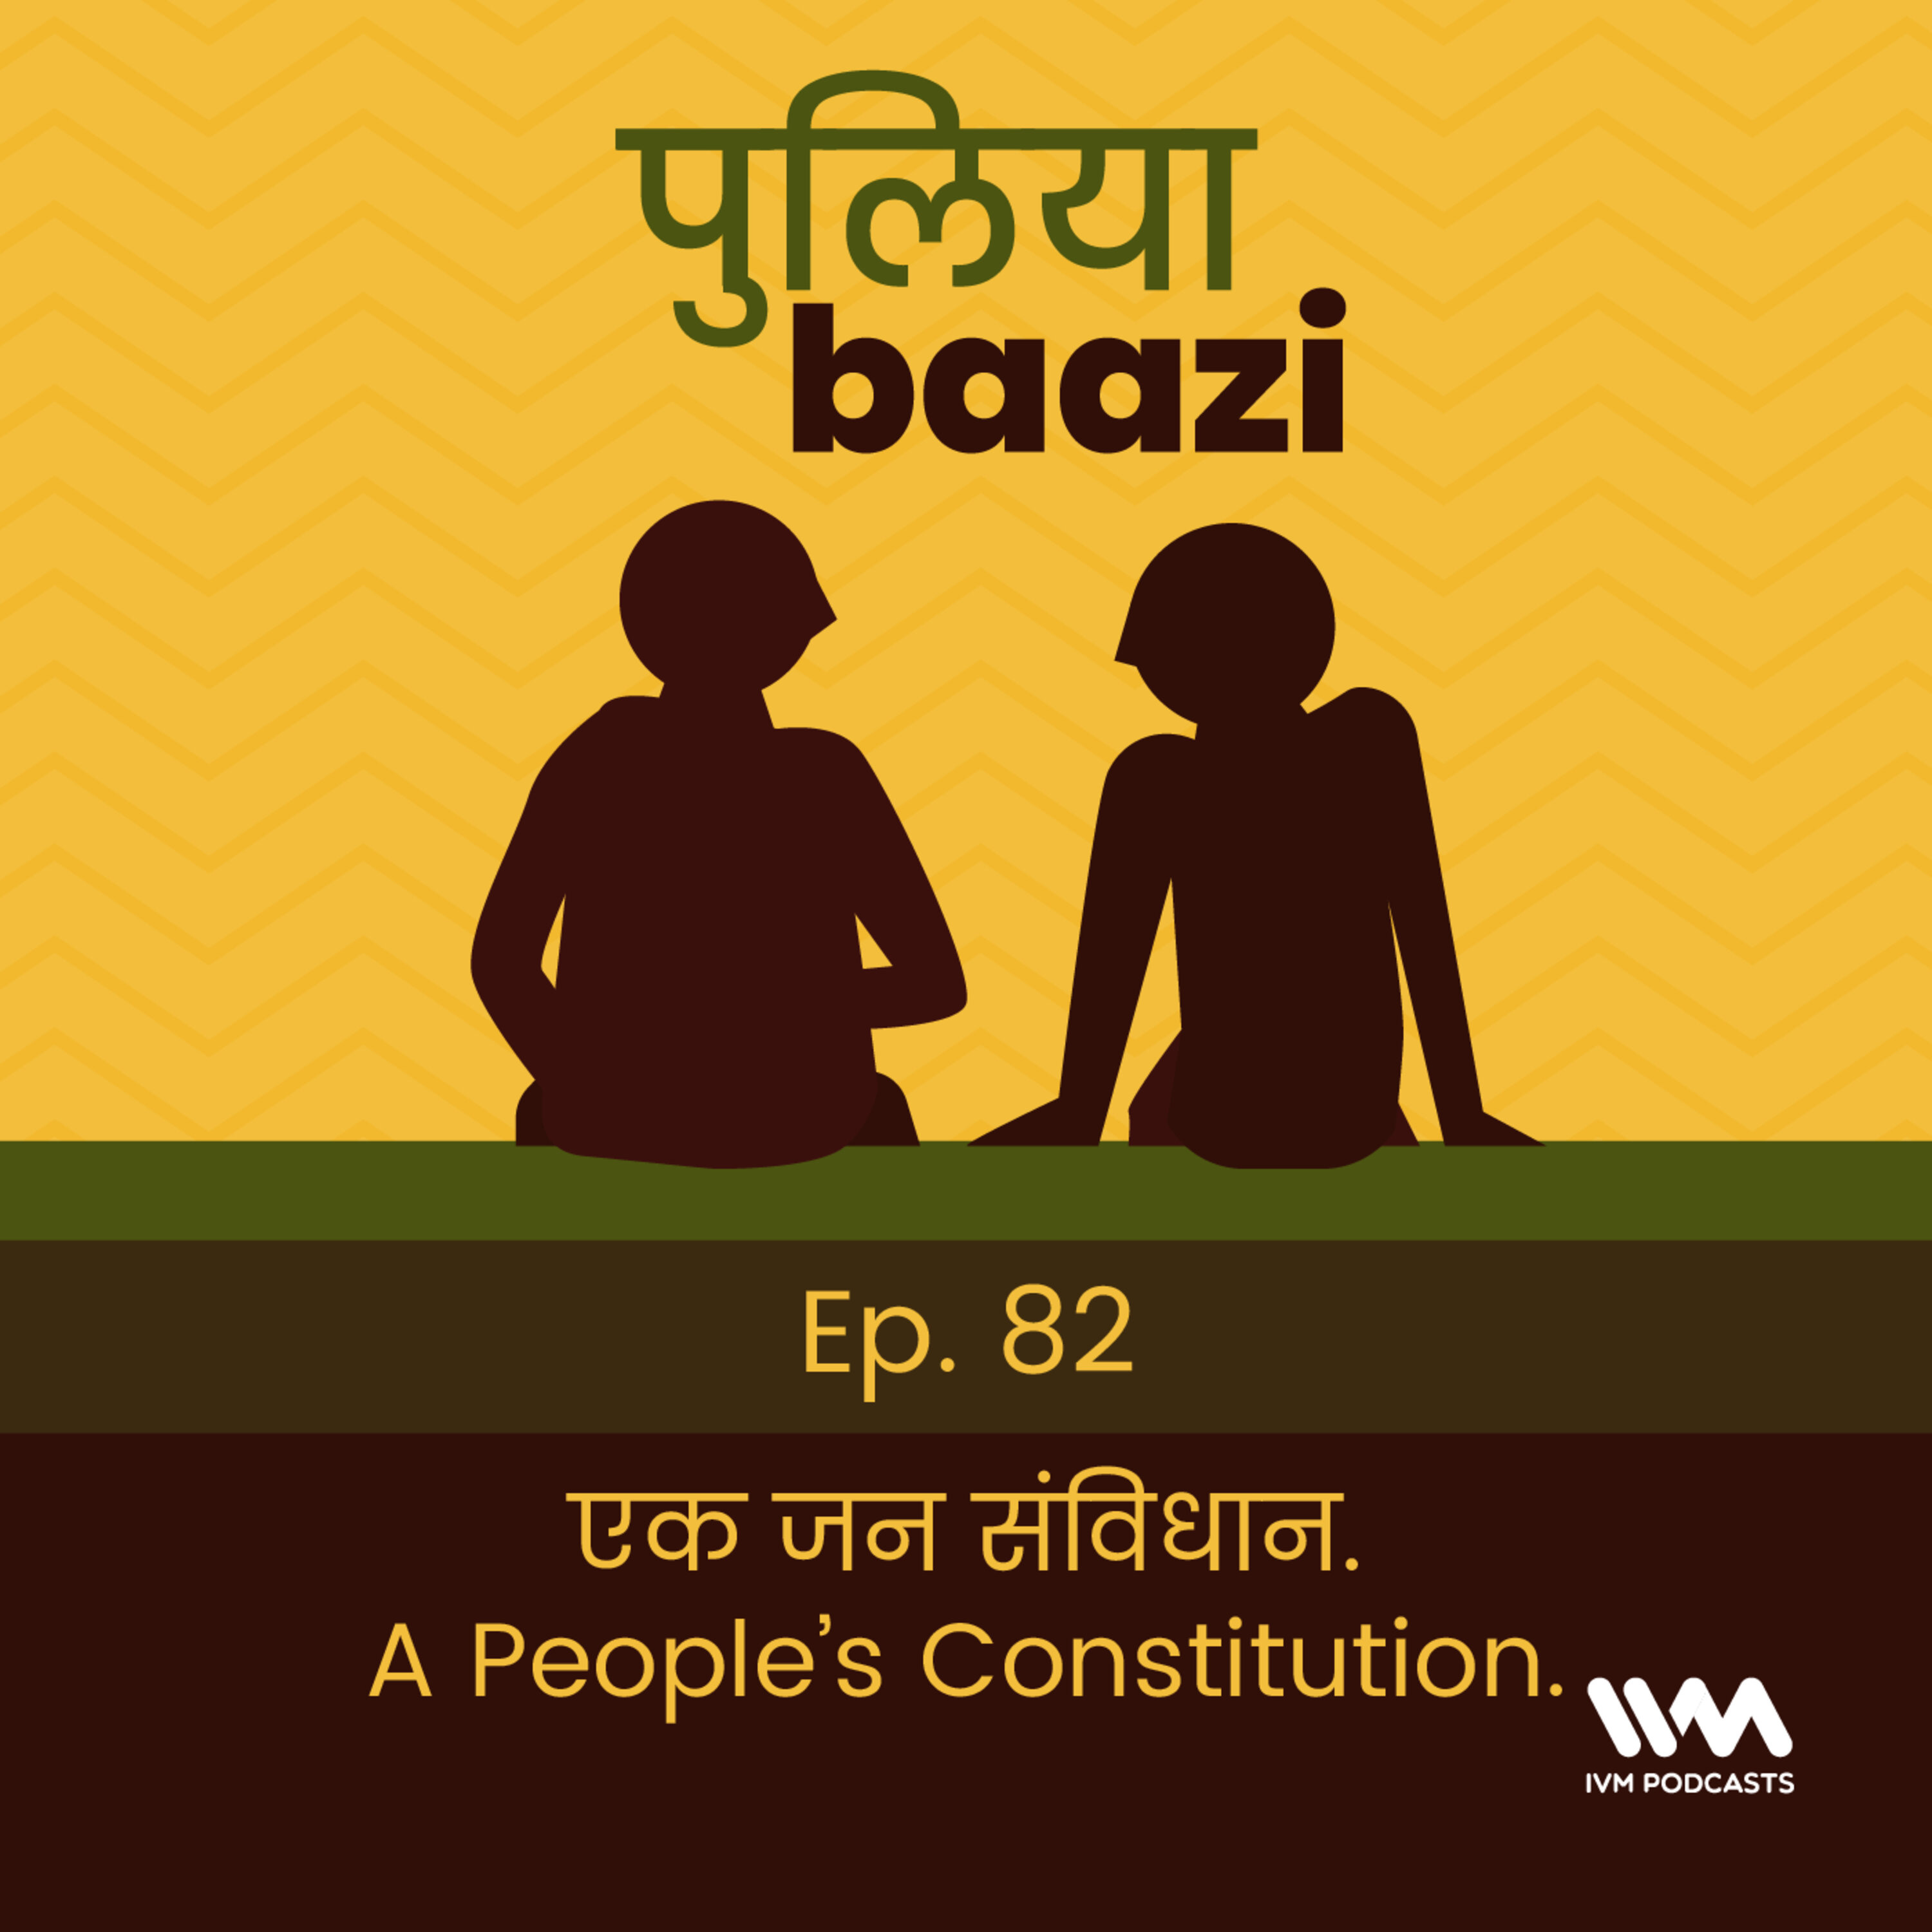 एक जन संविधान. A People’s Constitution.